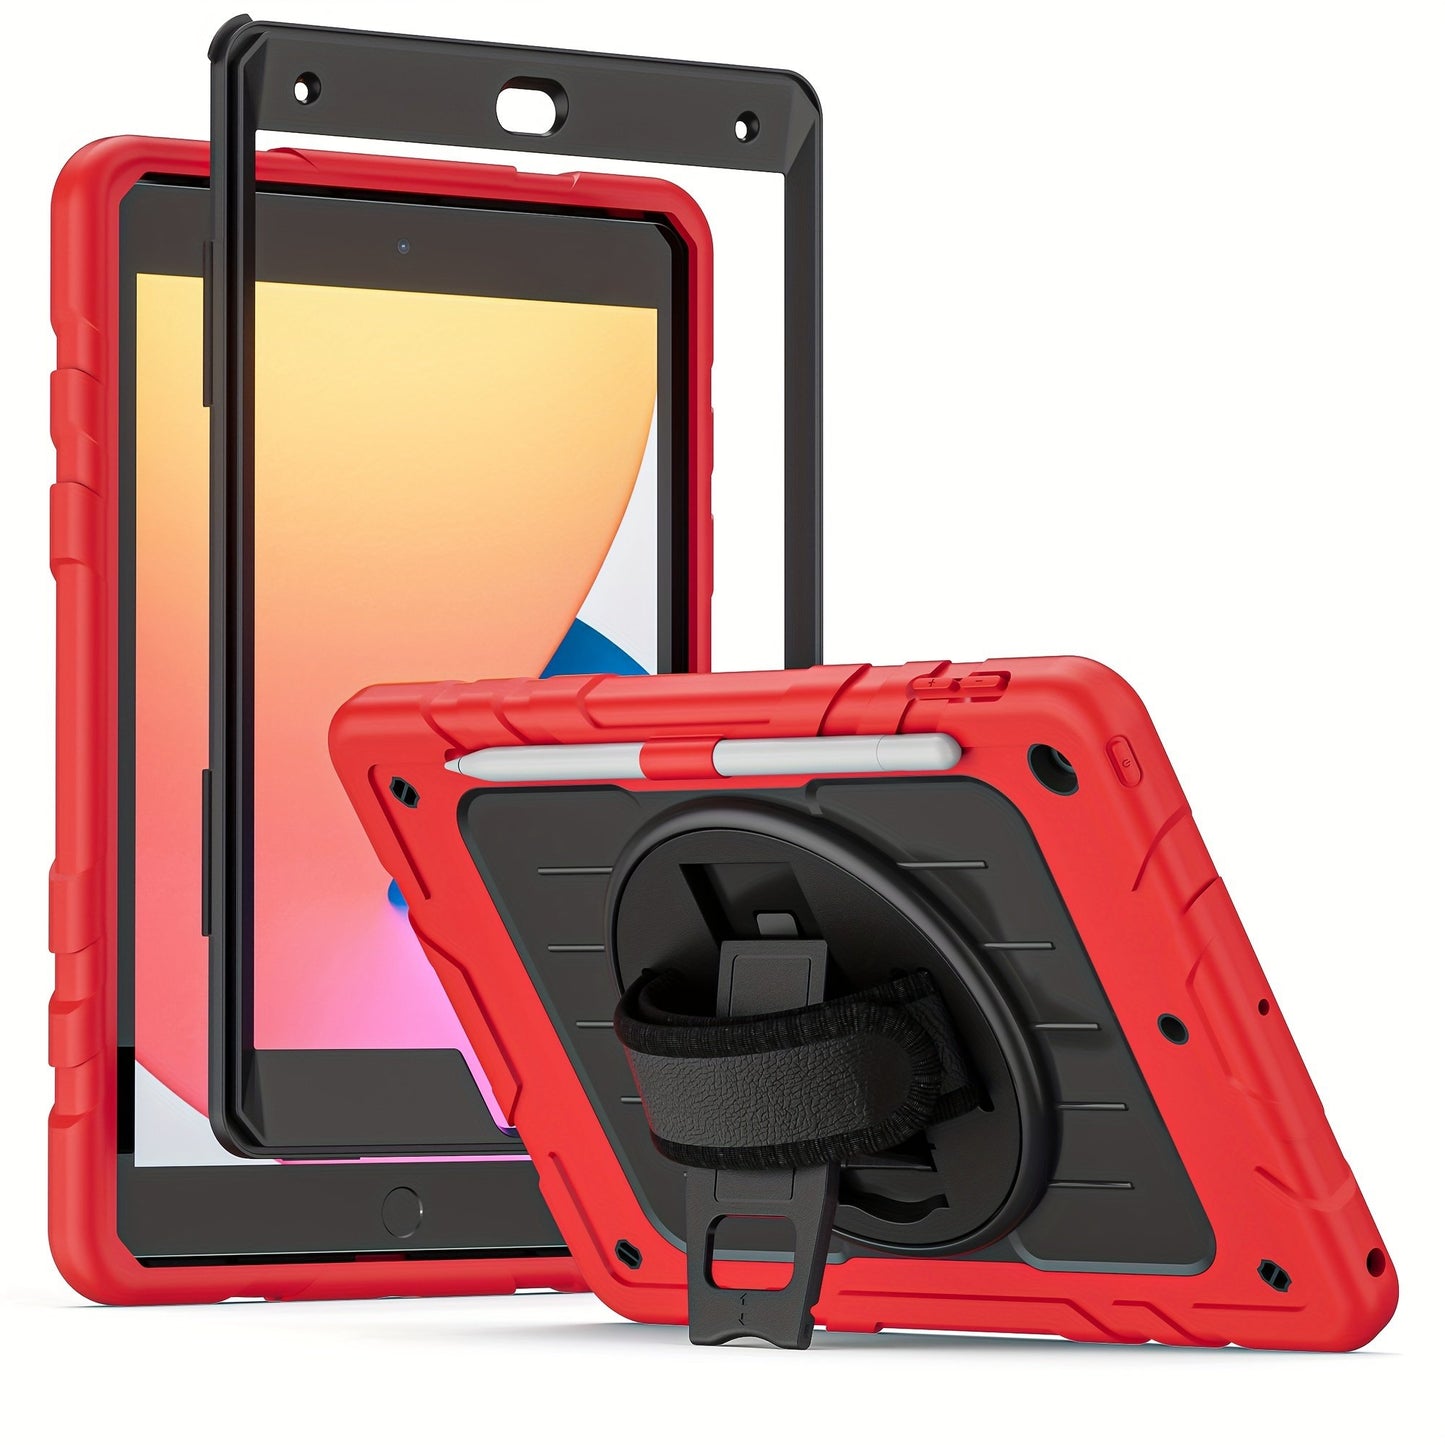 360 Turntable Design Case For IPad 7/8/9 10.2-inch 2019/2020/2021 Protective Case Pen Holder With Bracket Heavy Duty Shockproof And Falling Protection Case For IPad 7/8/9 10.2-inch 2019/2020/2021 Protective Case With Pen Slot